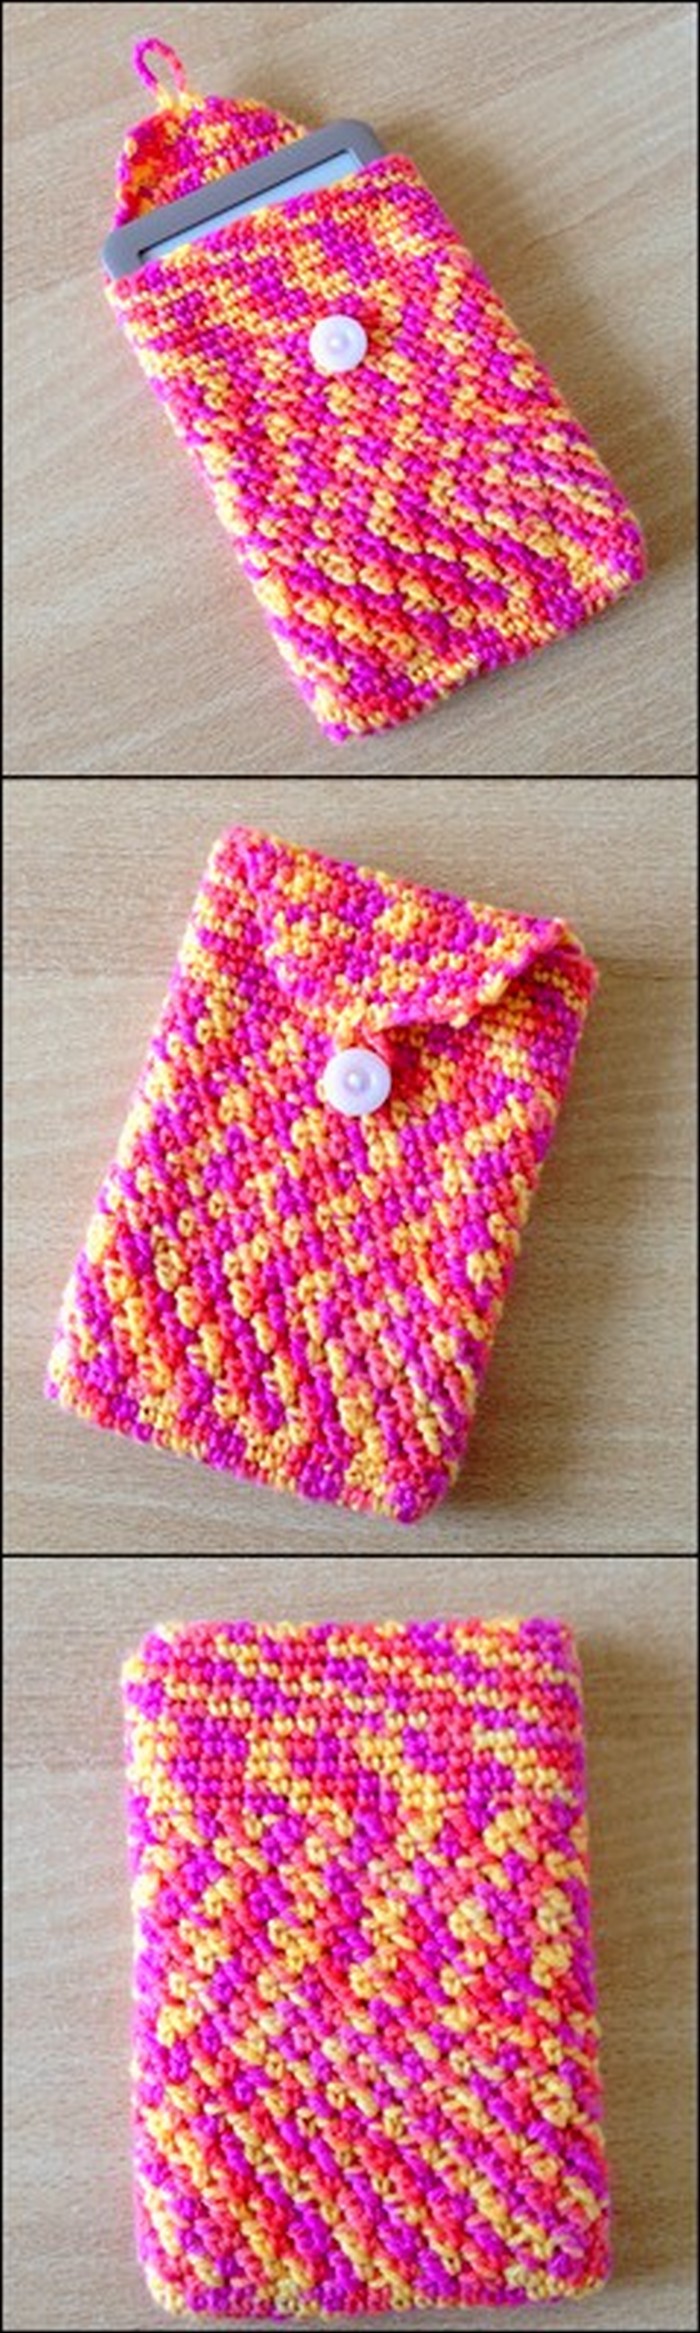 useful crochet pattern for tablet cover